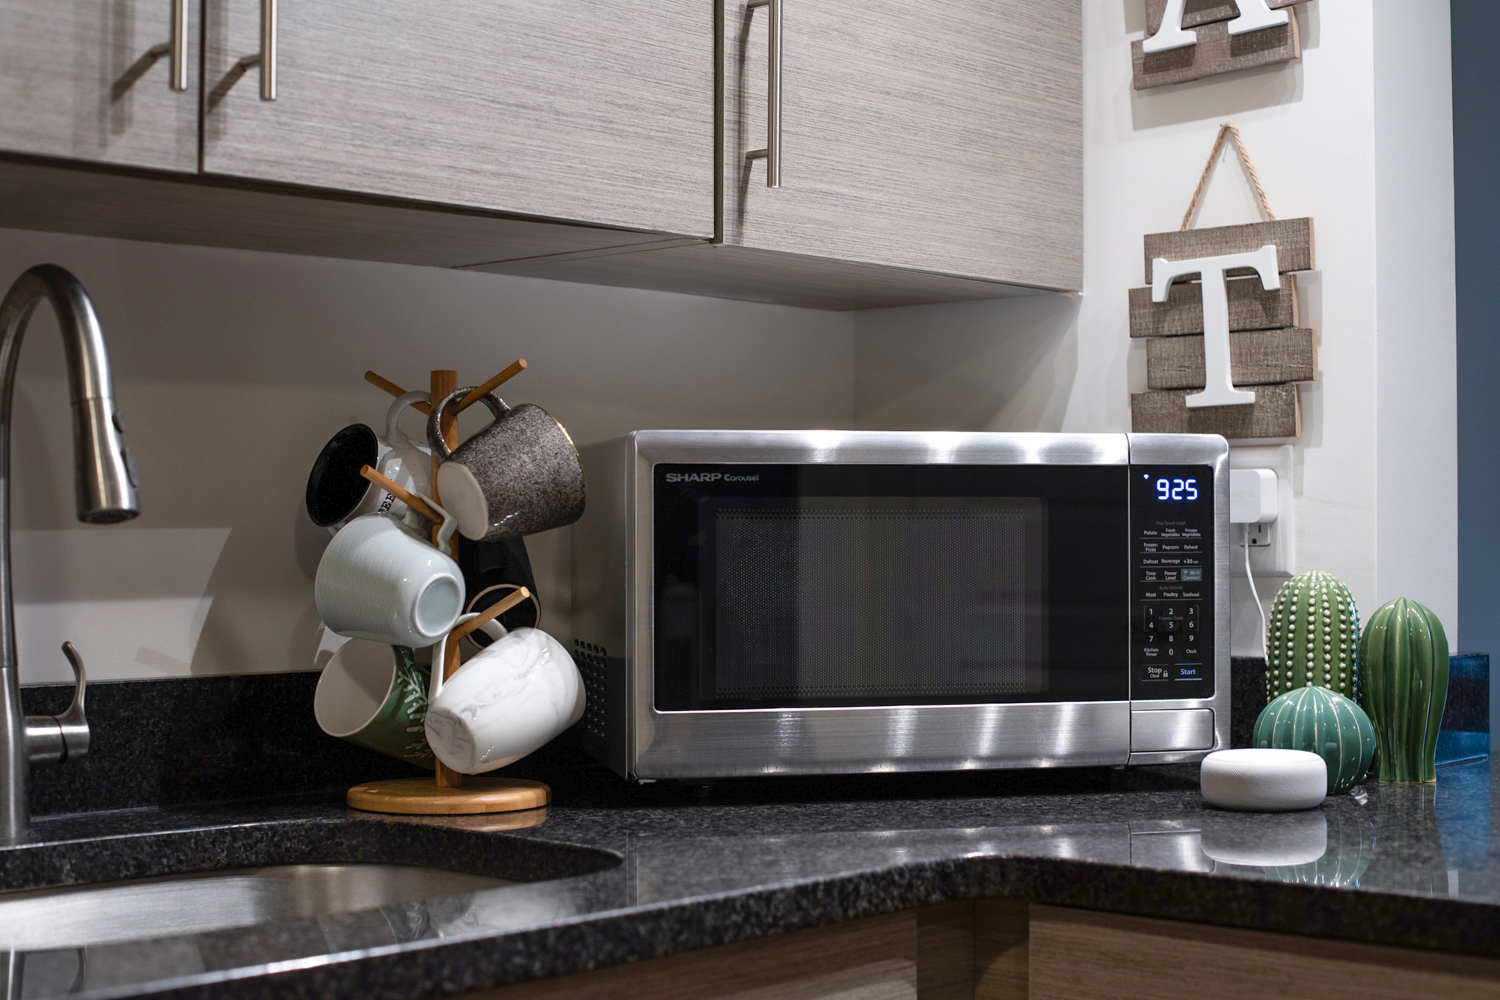 Panasonic NN-CD58JS is a mid-sized convection, grill and microwave oven